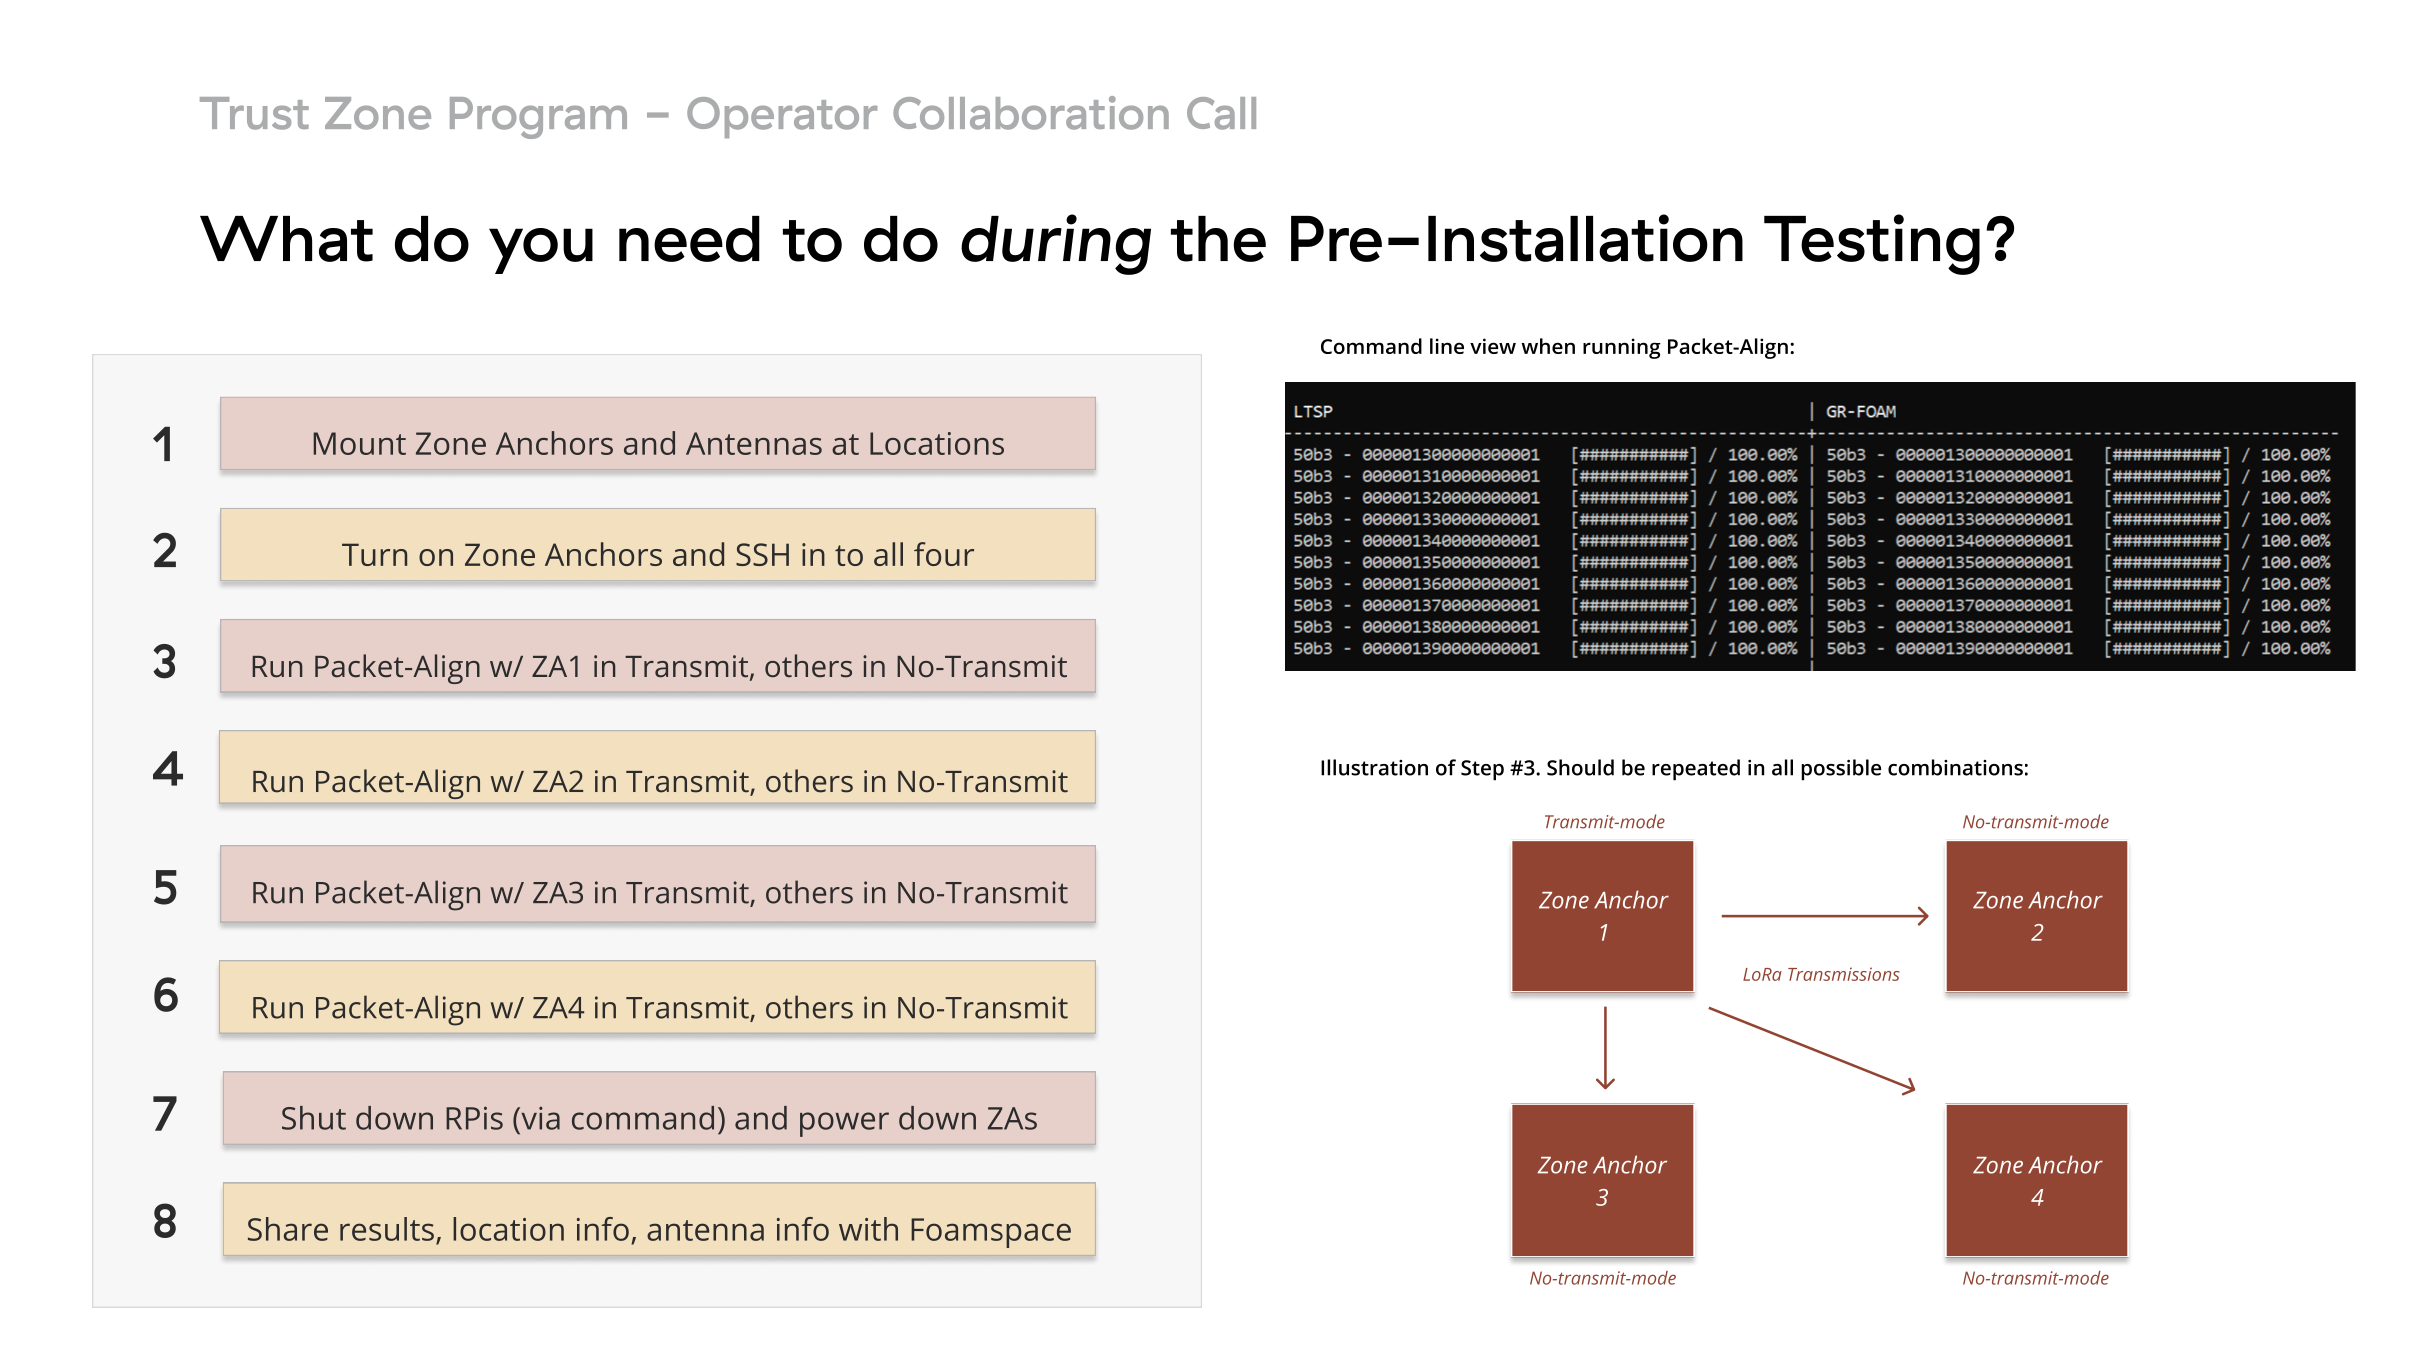 High-level summary of how pre-installation testing is done, and what the command line interface looks like when running a “packet-align” pre-installation test.